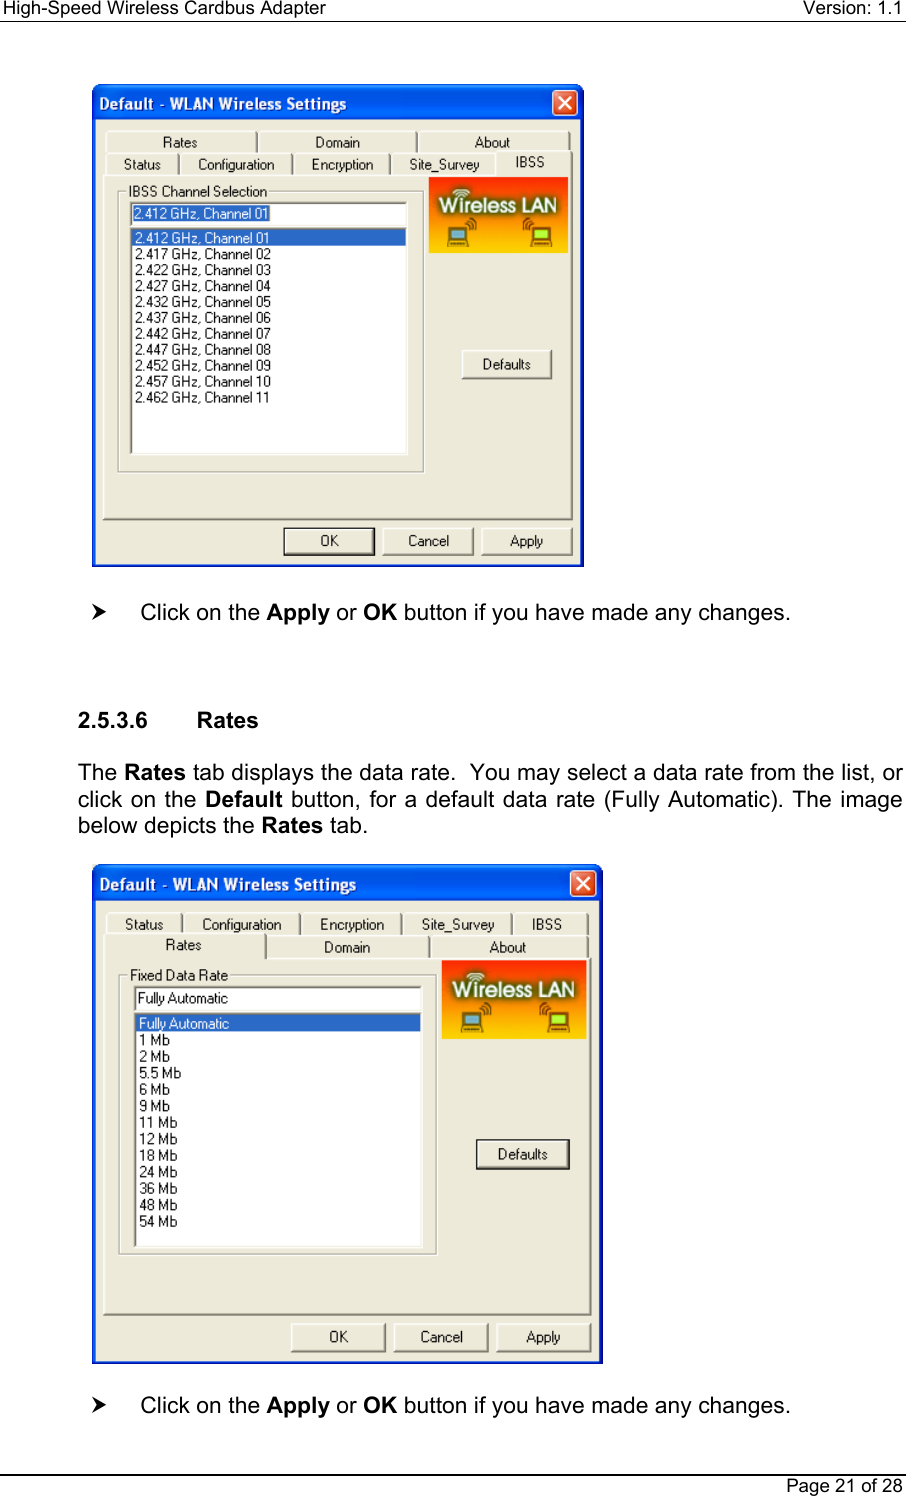 High-Speed Wireless Cardbus Adapter Version: 1.1Page 21 of 28h  Click on the Apply or OK button if you have made any changes.2.5.3.6  RatesThe Rates tab displays the data rate.  You may select a data rate from the list, orclick on the Default button, for a default data rate (Fully Automatic). The imagebelow depicts the Rates tab.h  Click on the Apply or OK button if you have made any changes.